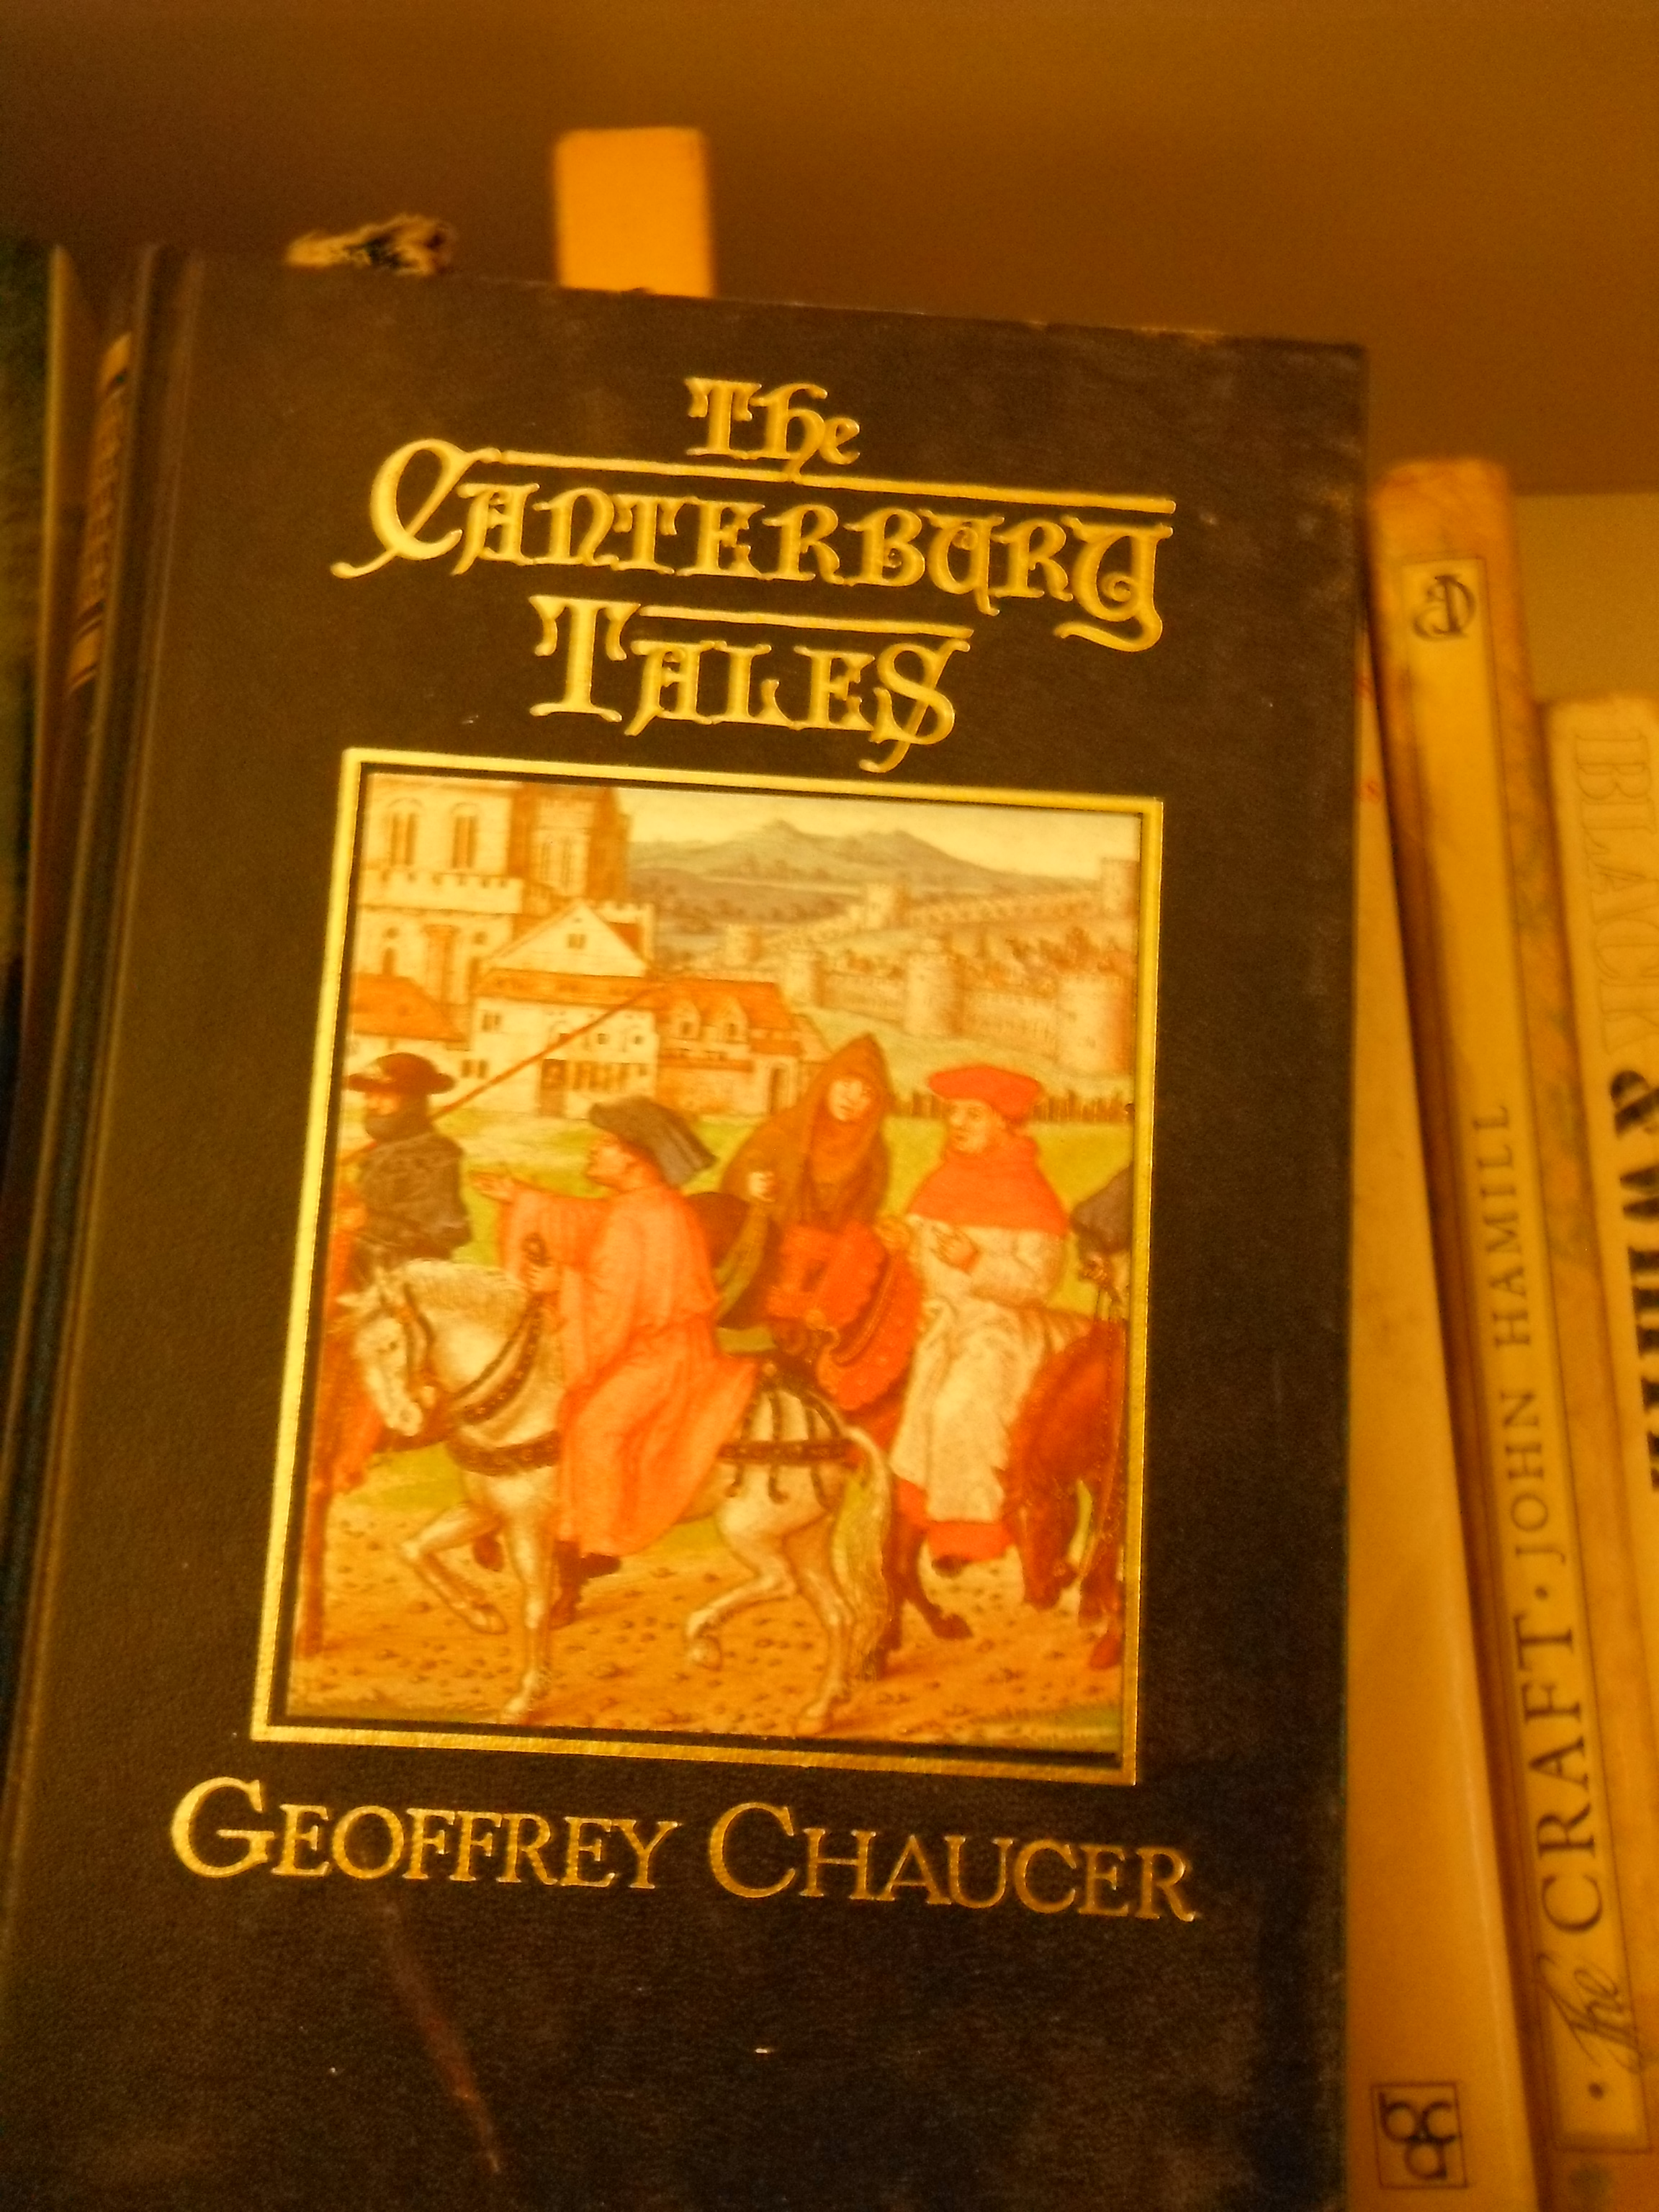 Photo taken by me – cover art to my copy of Chaucer’s Canterbury Tales 